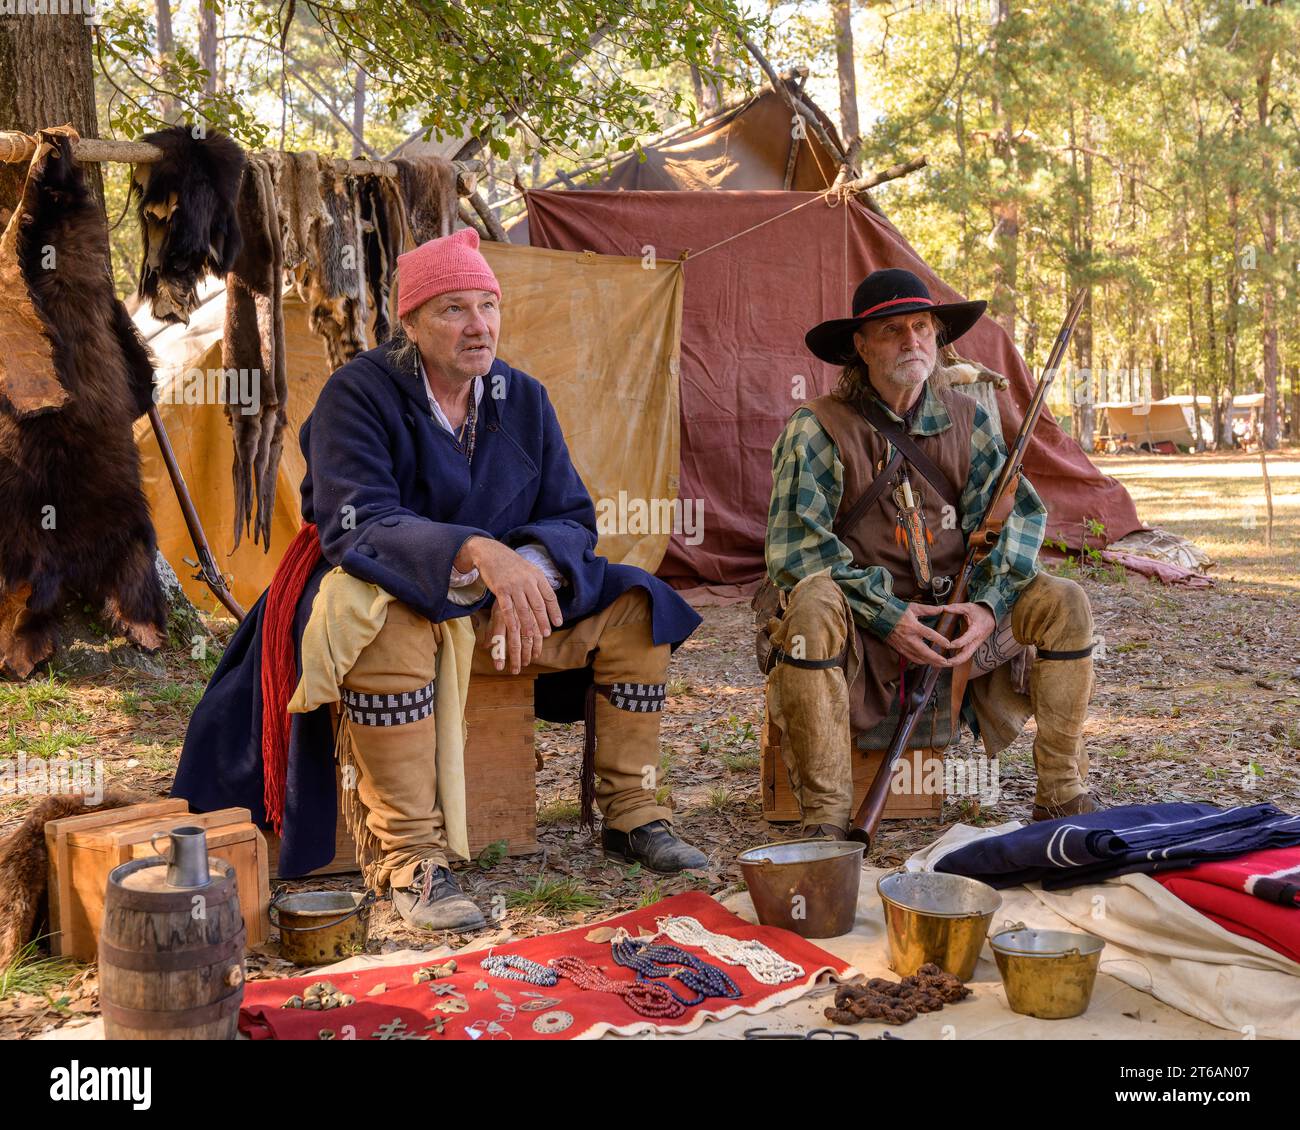 Two adult male actors portraying frontiersmen from the early 1800s in a campsite setting at a reenactment in Wetumpka Alabama, USA. Stock Photo